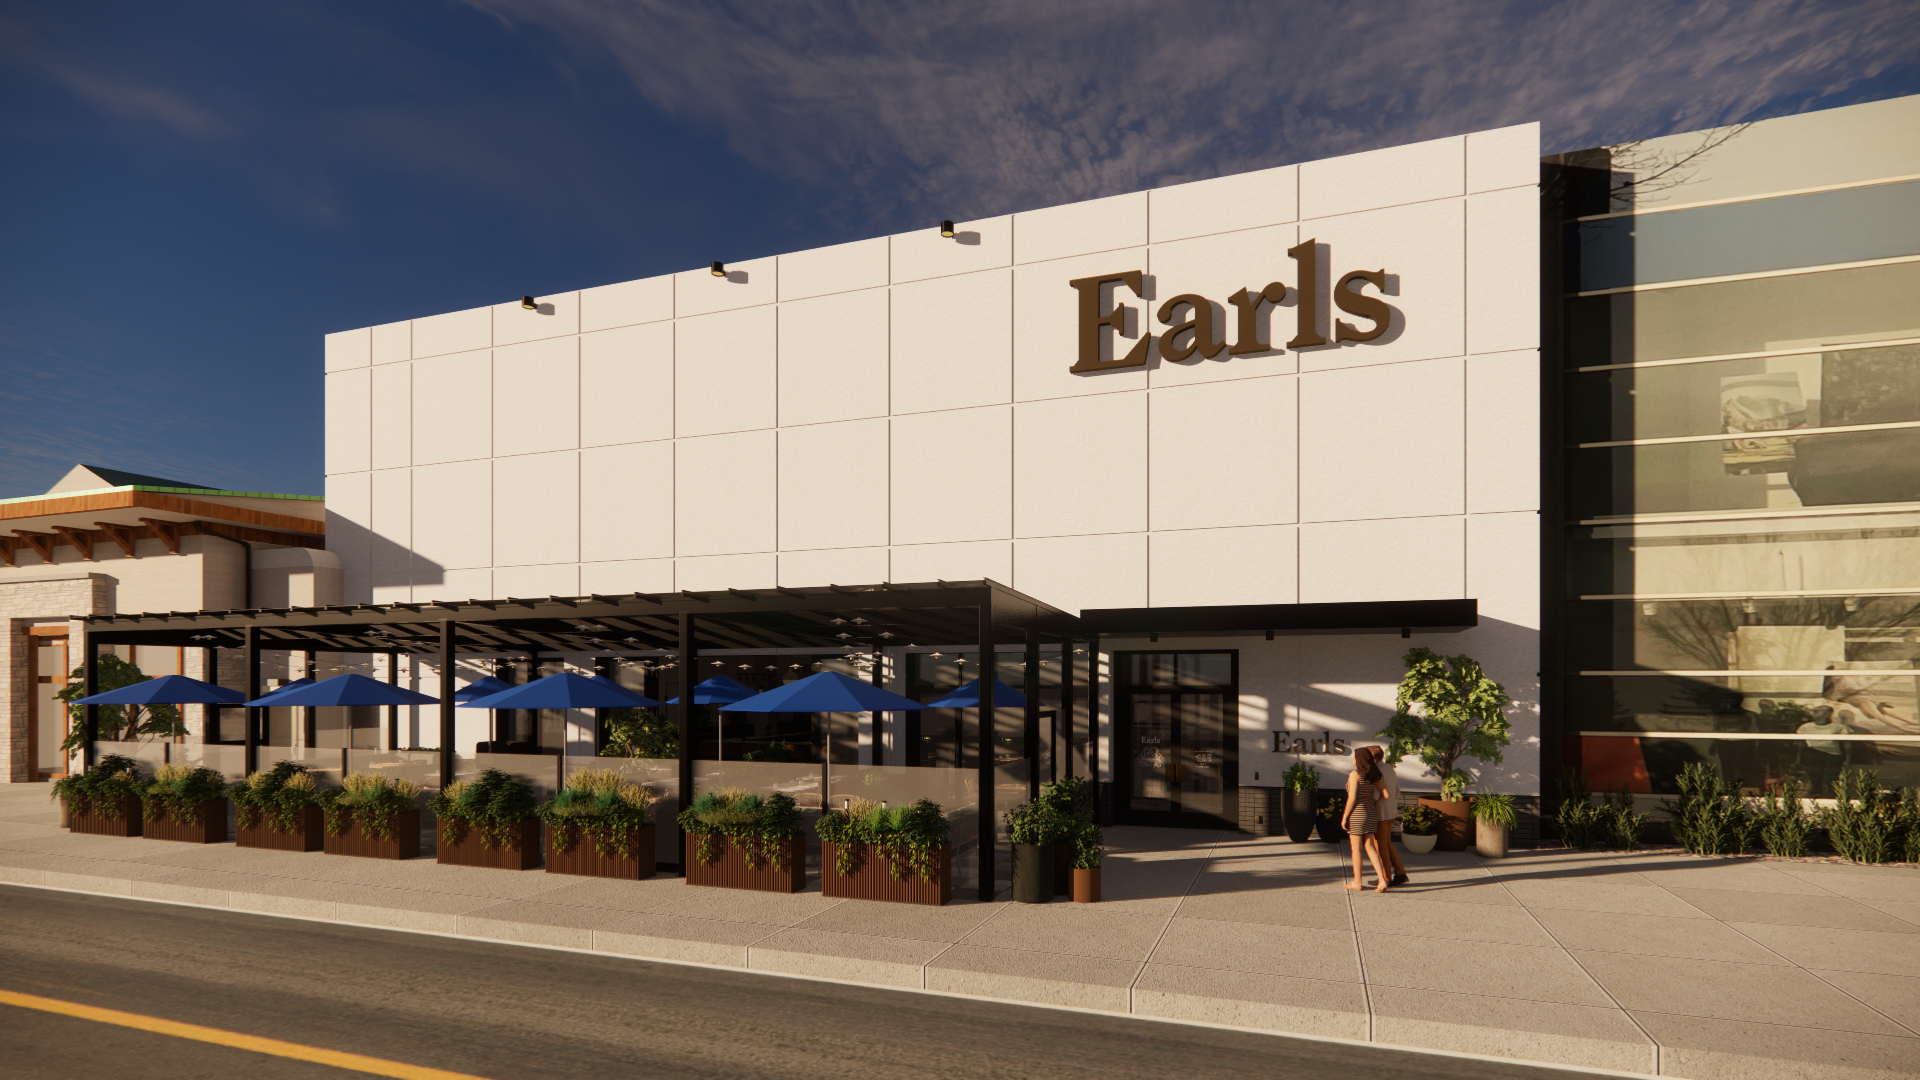 Earls Southcentre